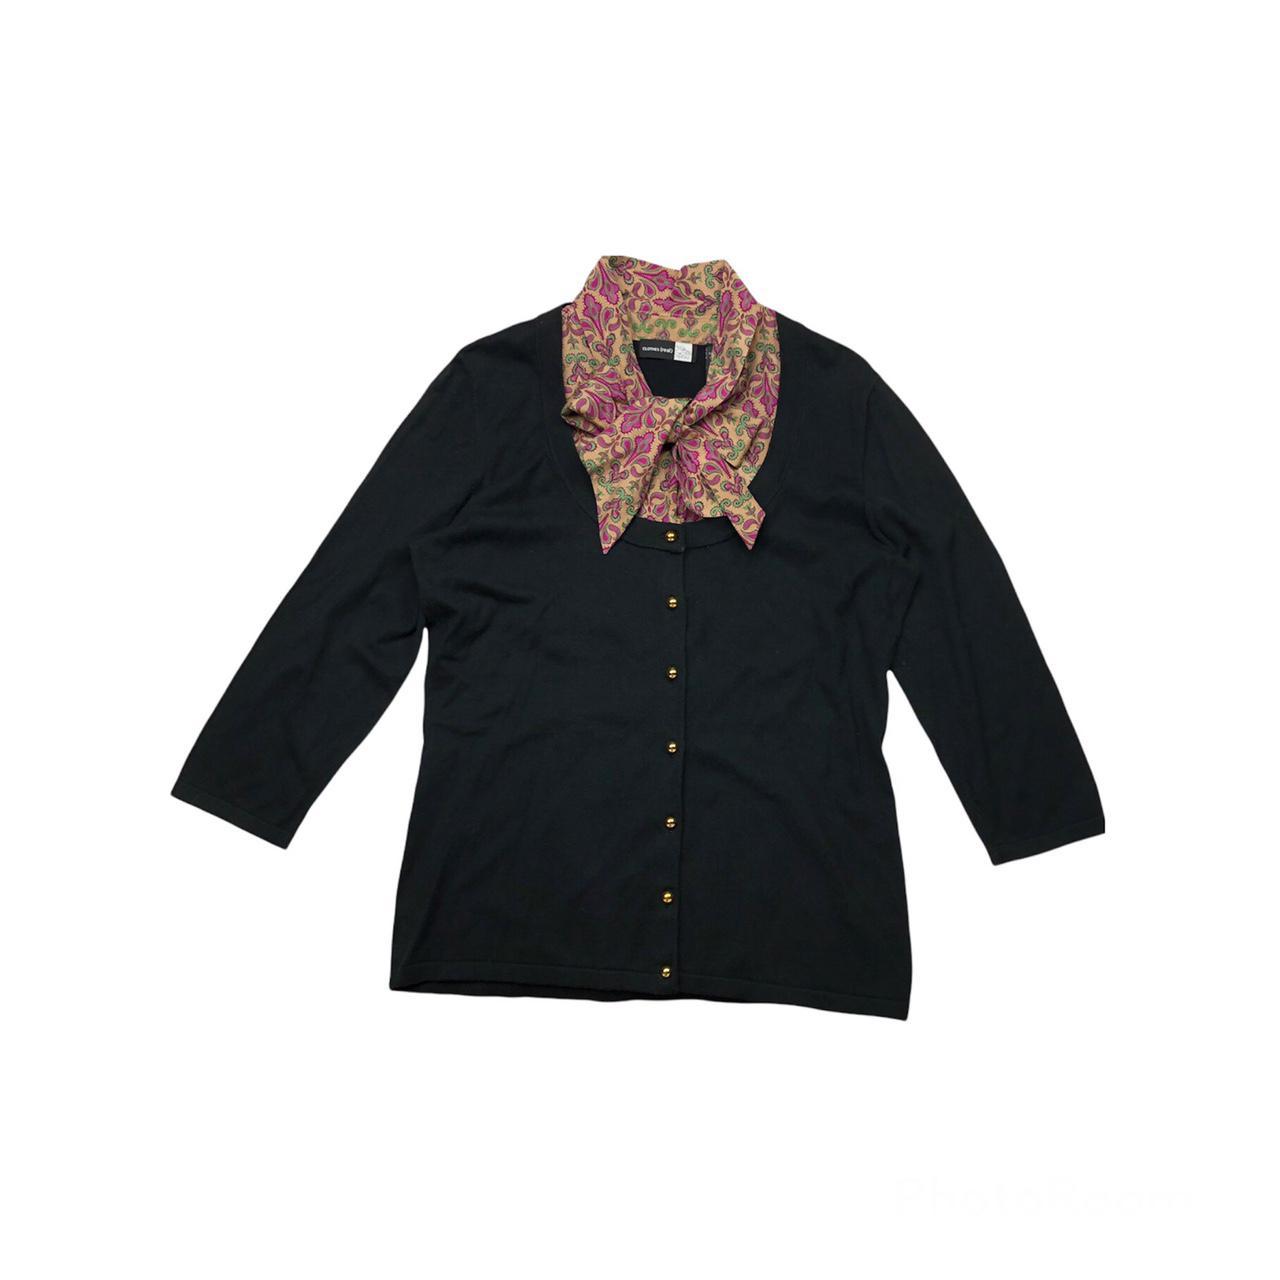 Product Image 1 - Paisley black pussy bow blouse

Brand: